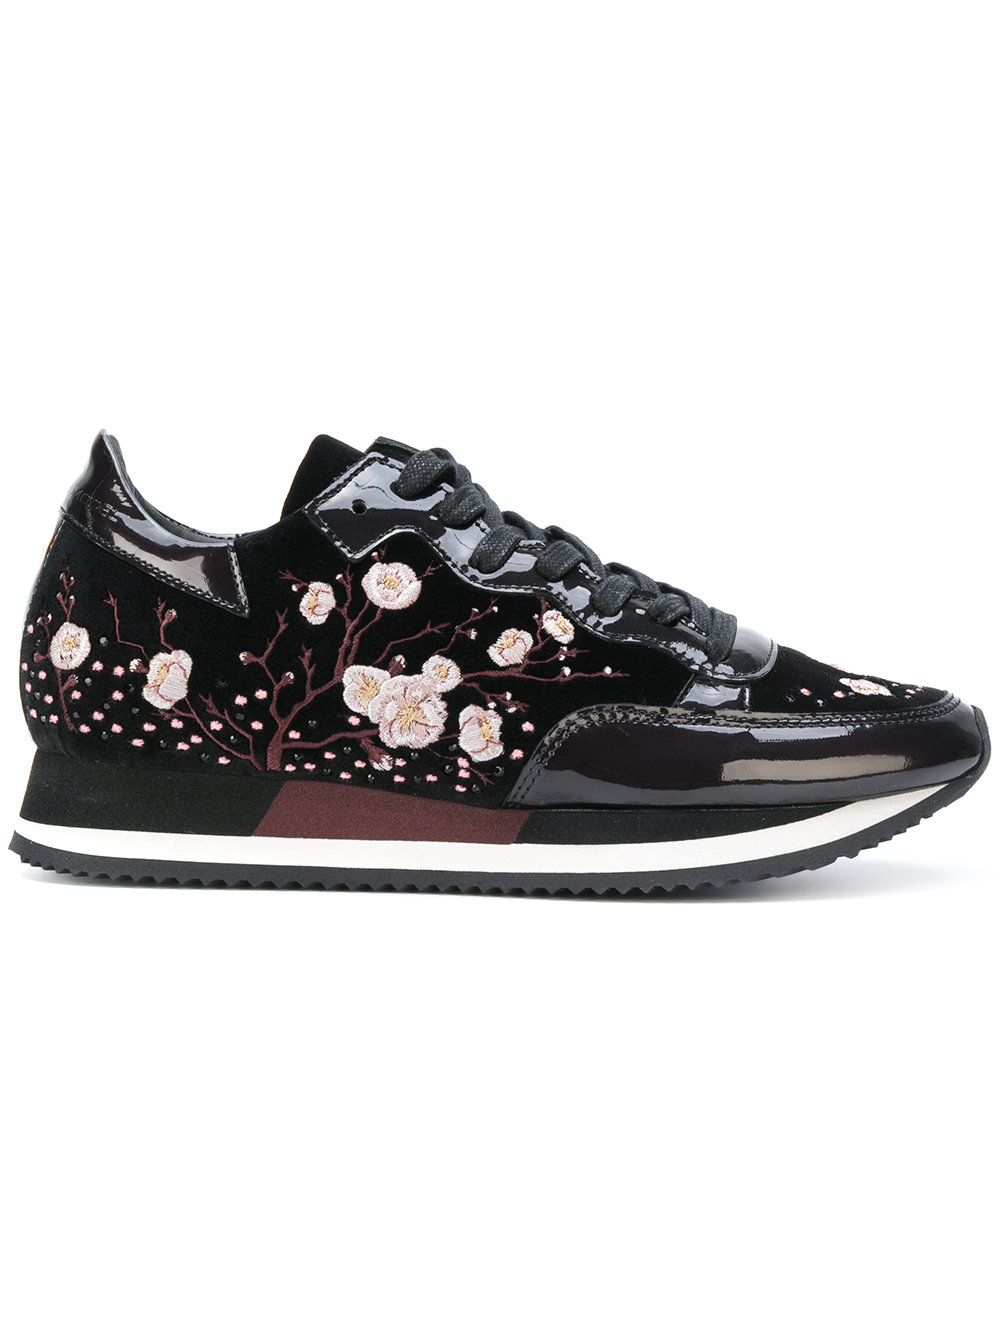 Floral Patch Lace-up Sneakers, Phillippe Model, $552